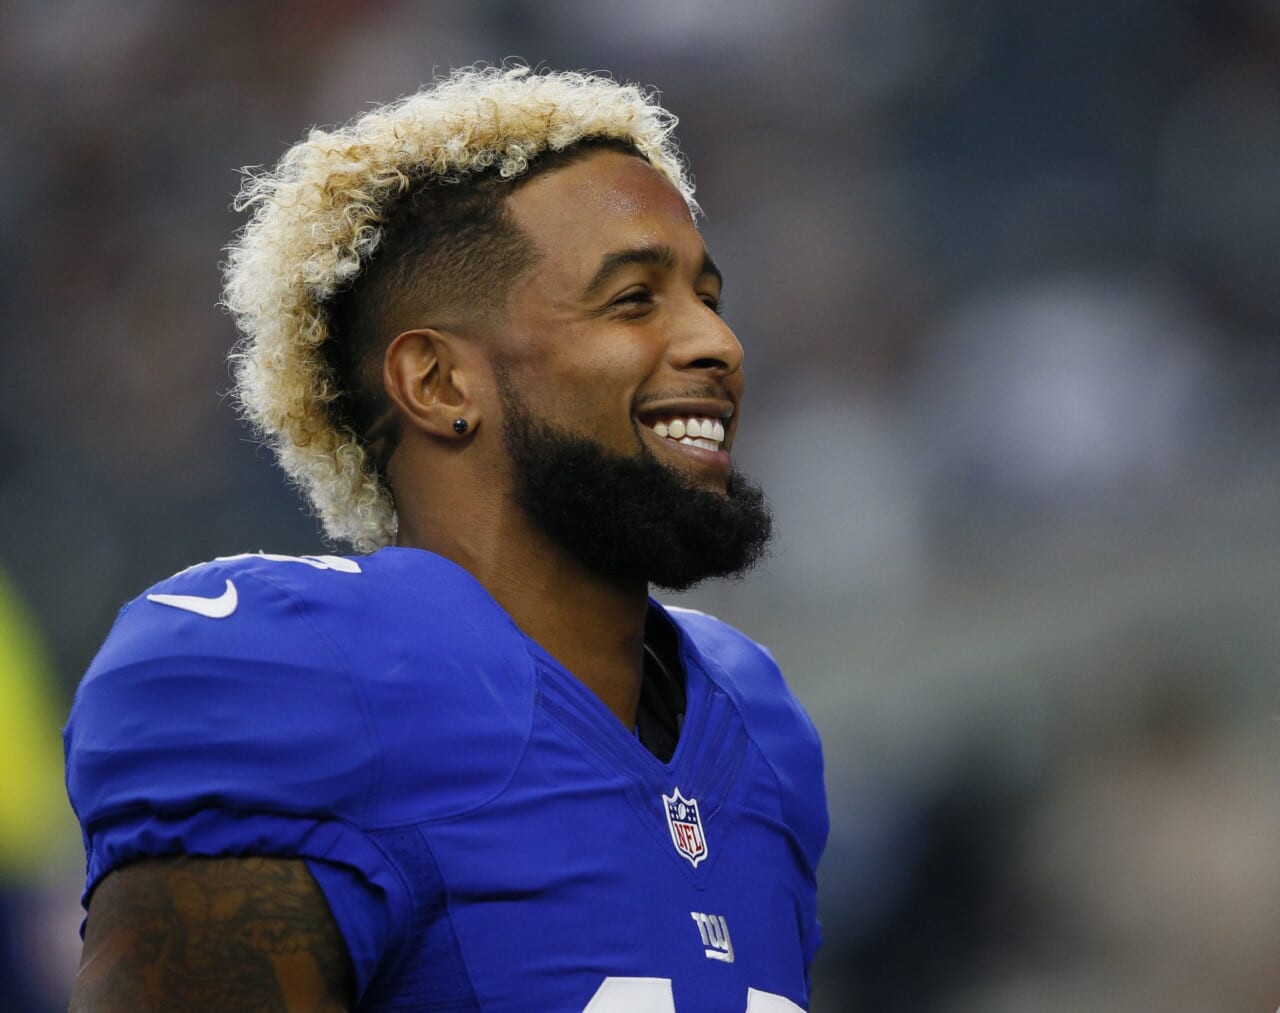 BREAKING: Odell Beckham Jr. And Giants Agree To 5-Year Extension